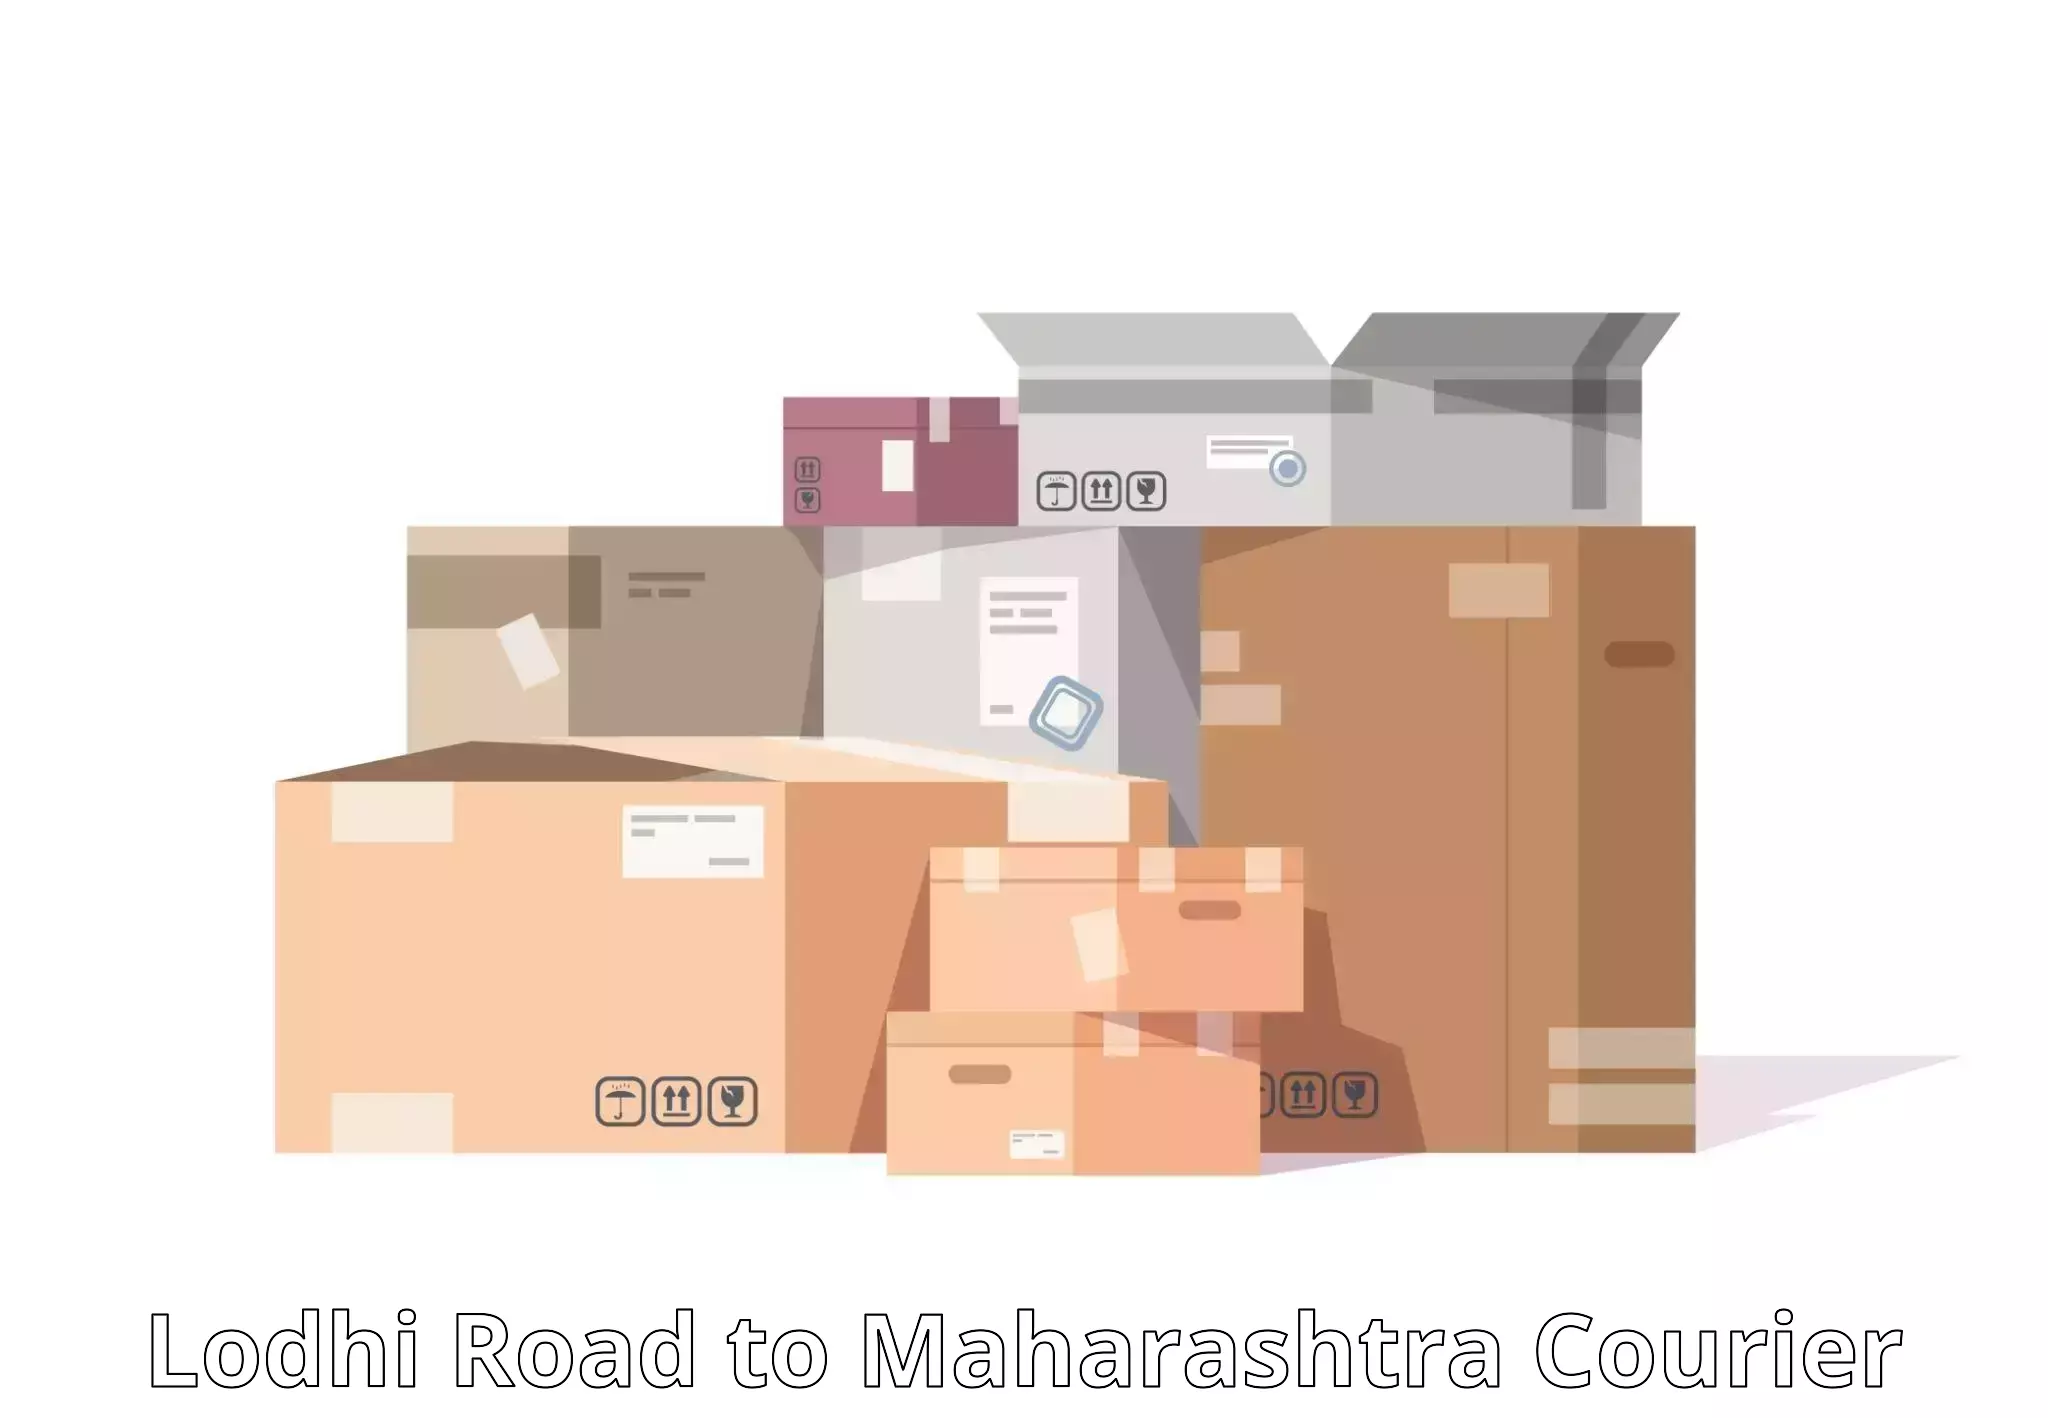 Smart courier technologies in Lodhi Road to Mumbai Port